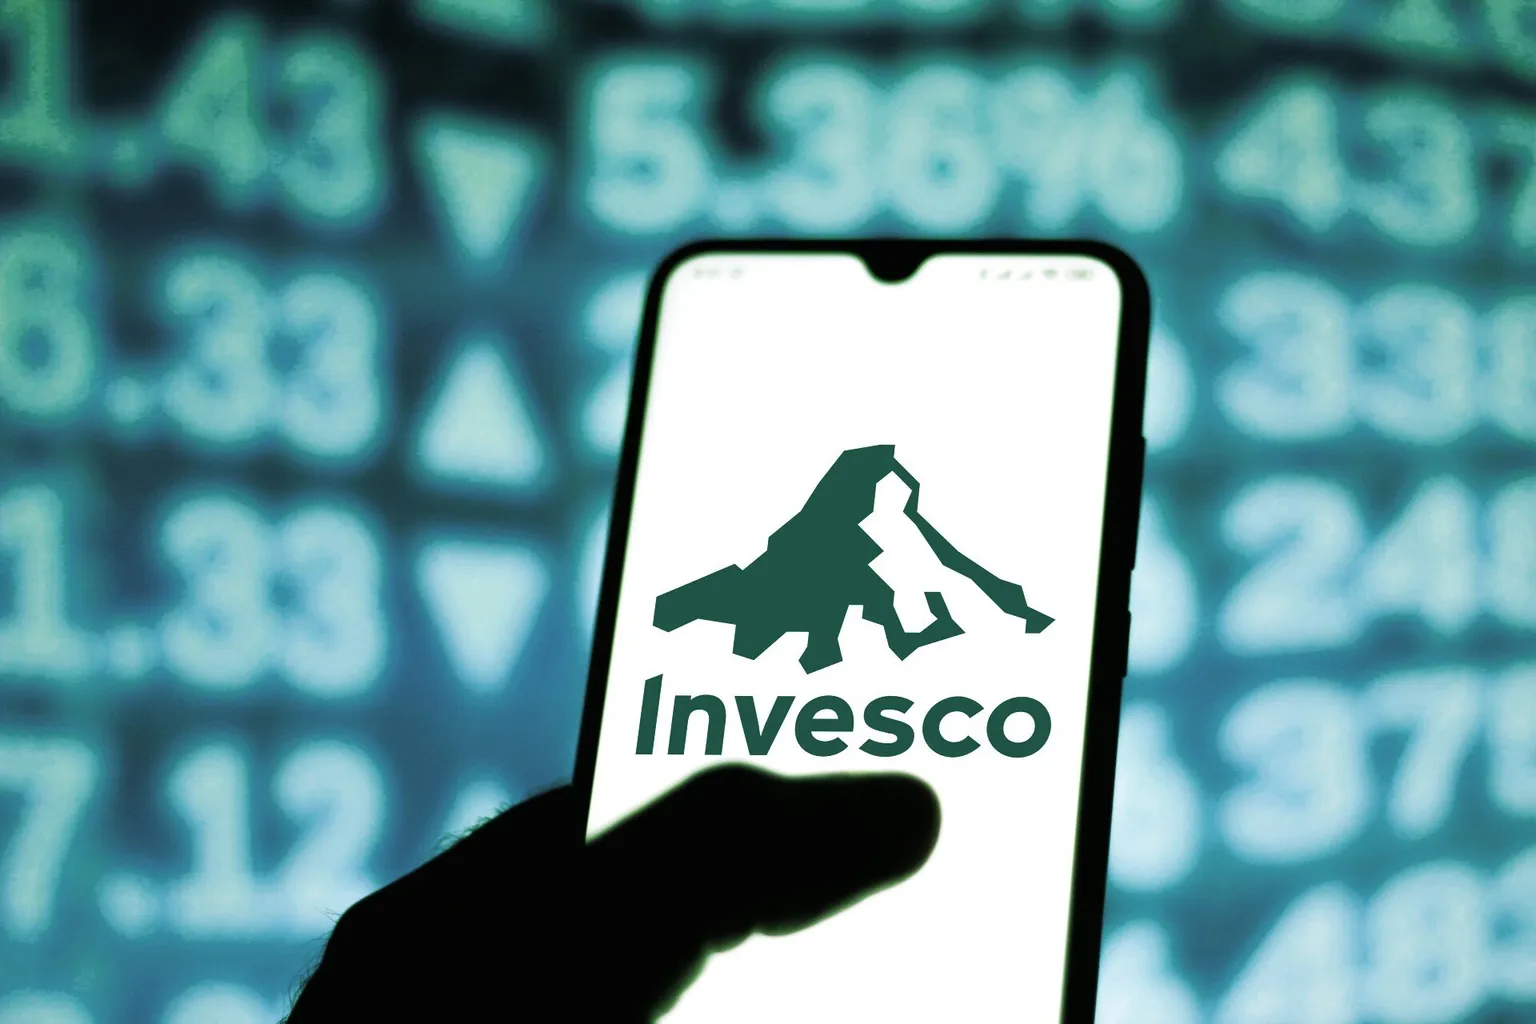 Invesco is an Atlanta-based investment house. Image: Shutterstock.